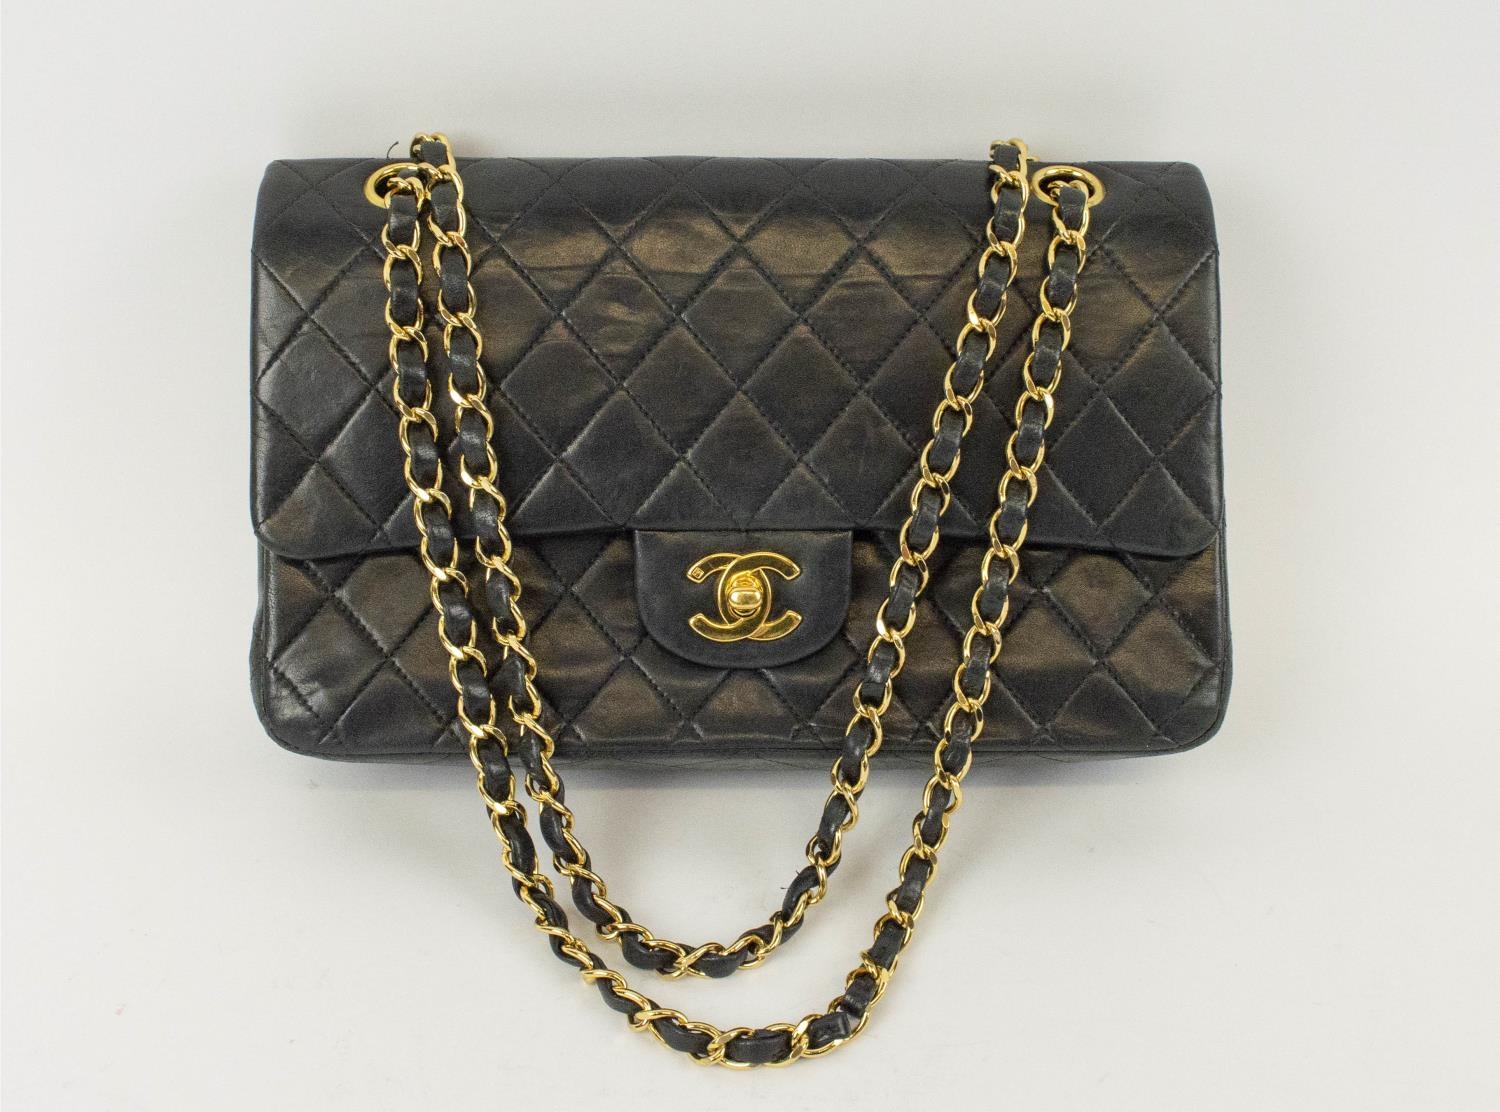 CHANEL FLAP BAG, with front double flap closure, quilted effect and gold hardware, chain and leather